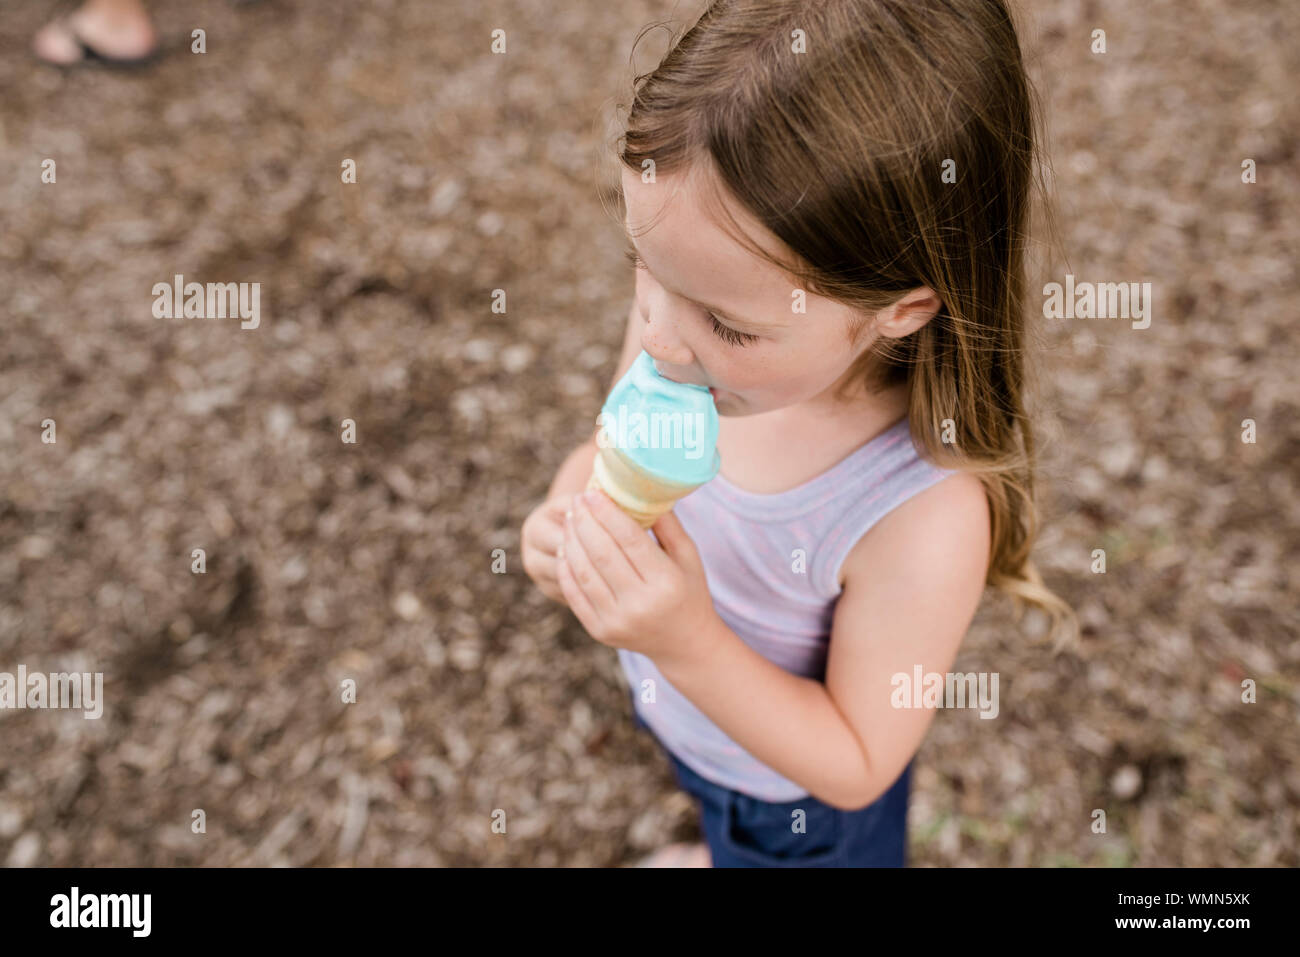 Close up of young girl eating a blue ice cream cone Banque D'Images